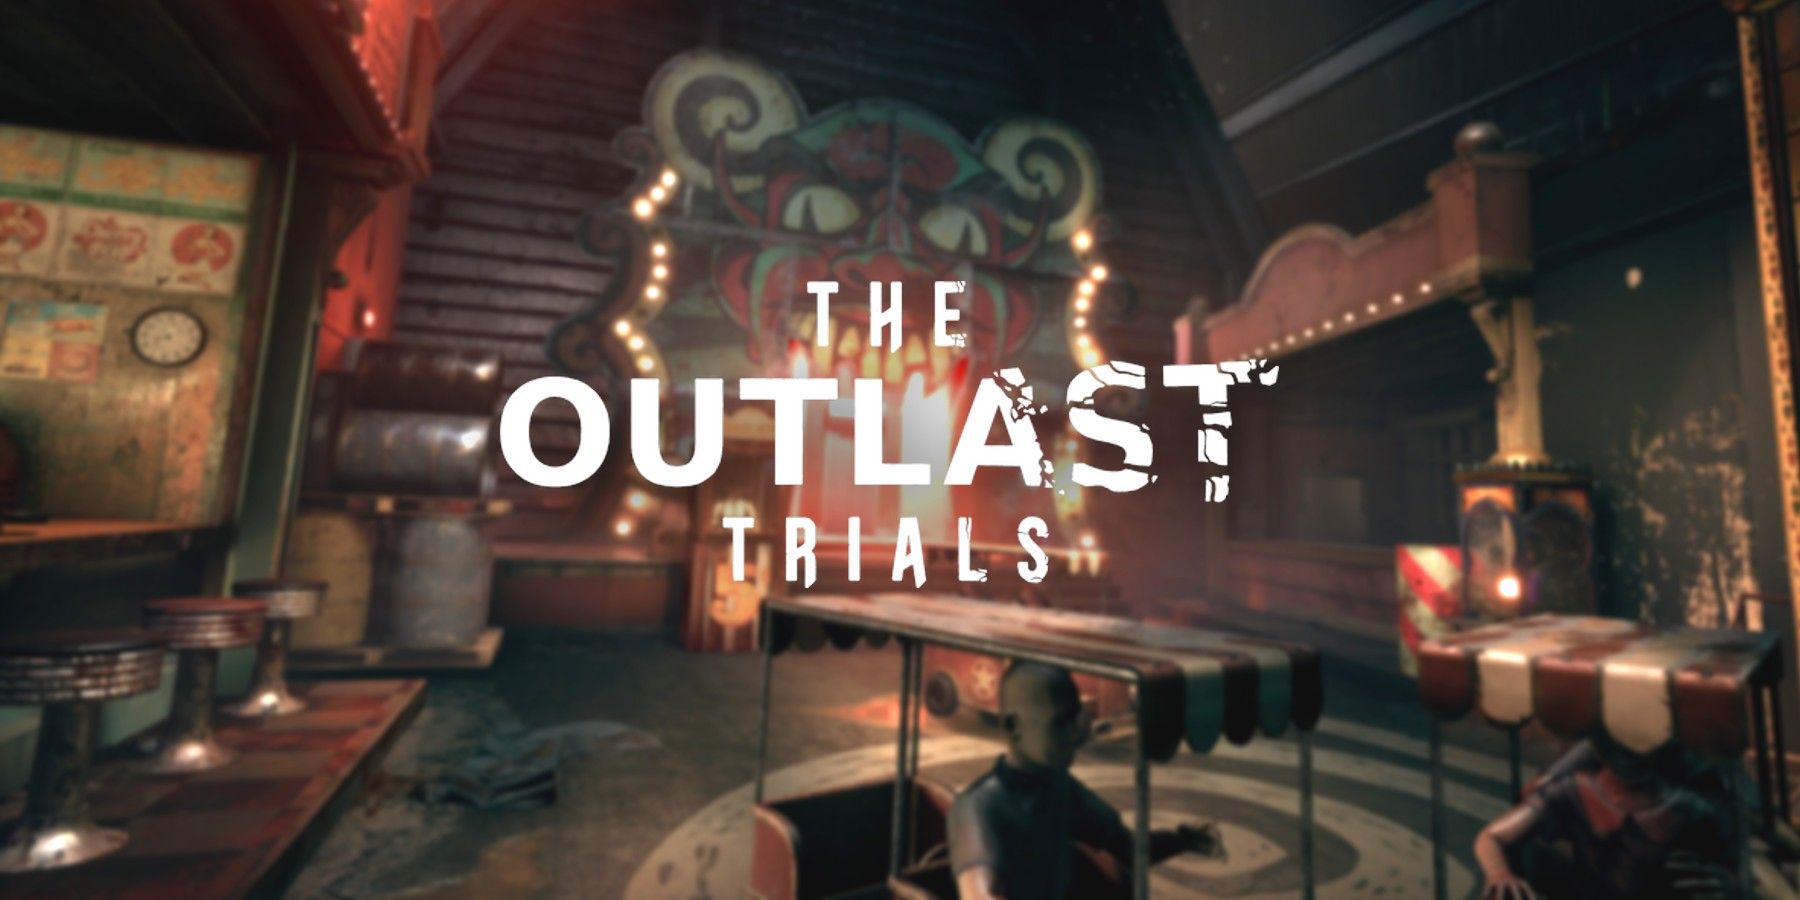 the-outlast-trials-logo-carnival-background